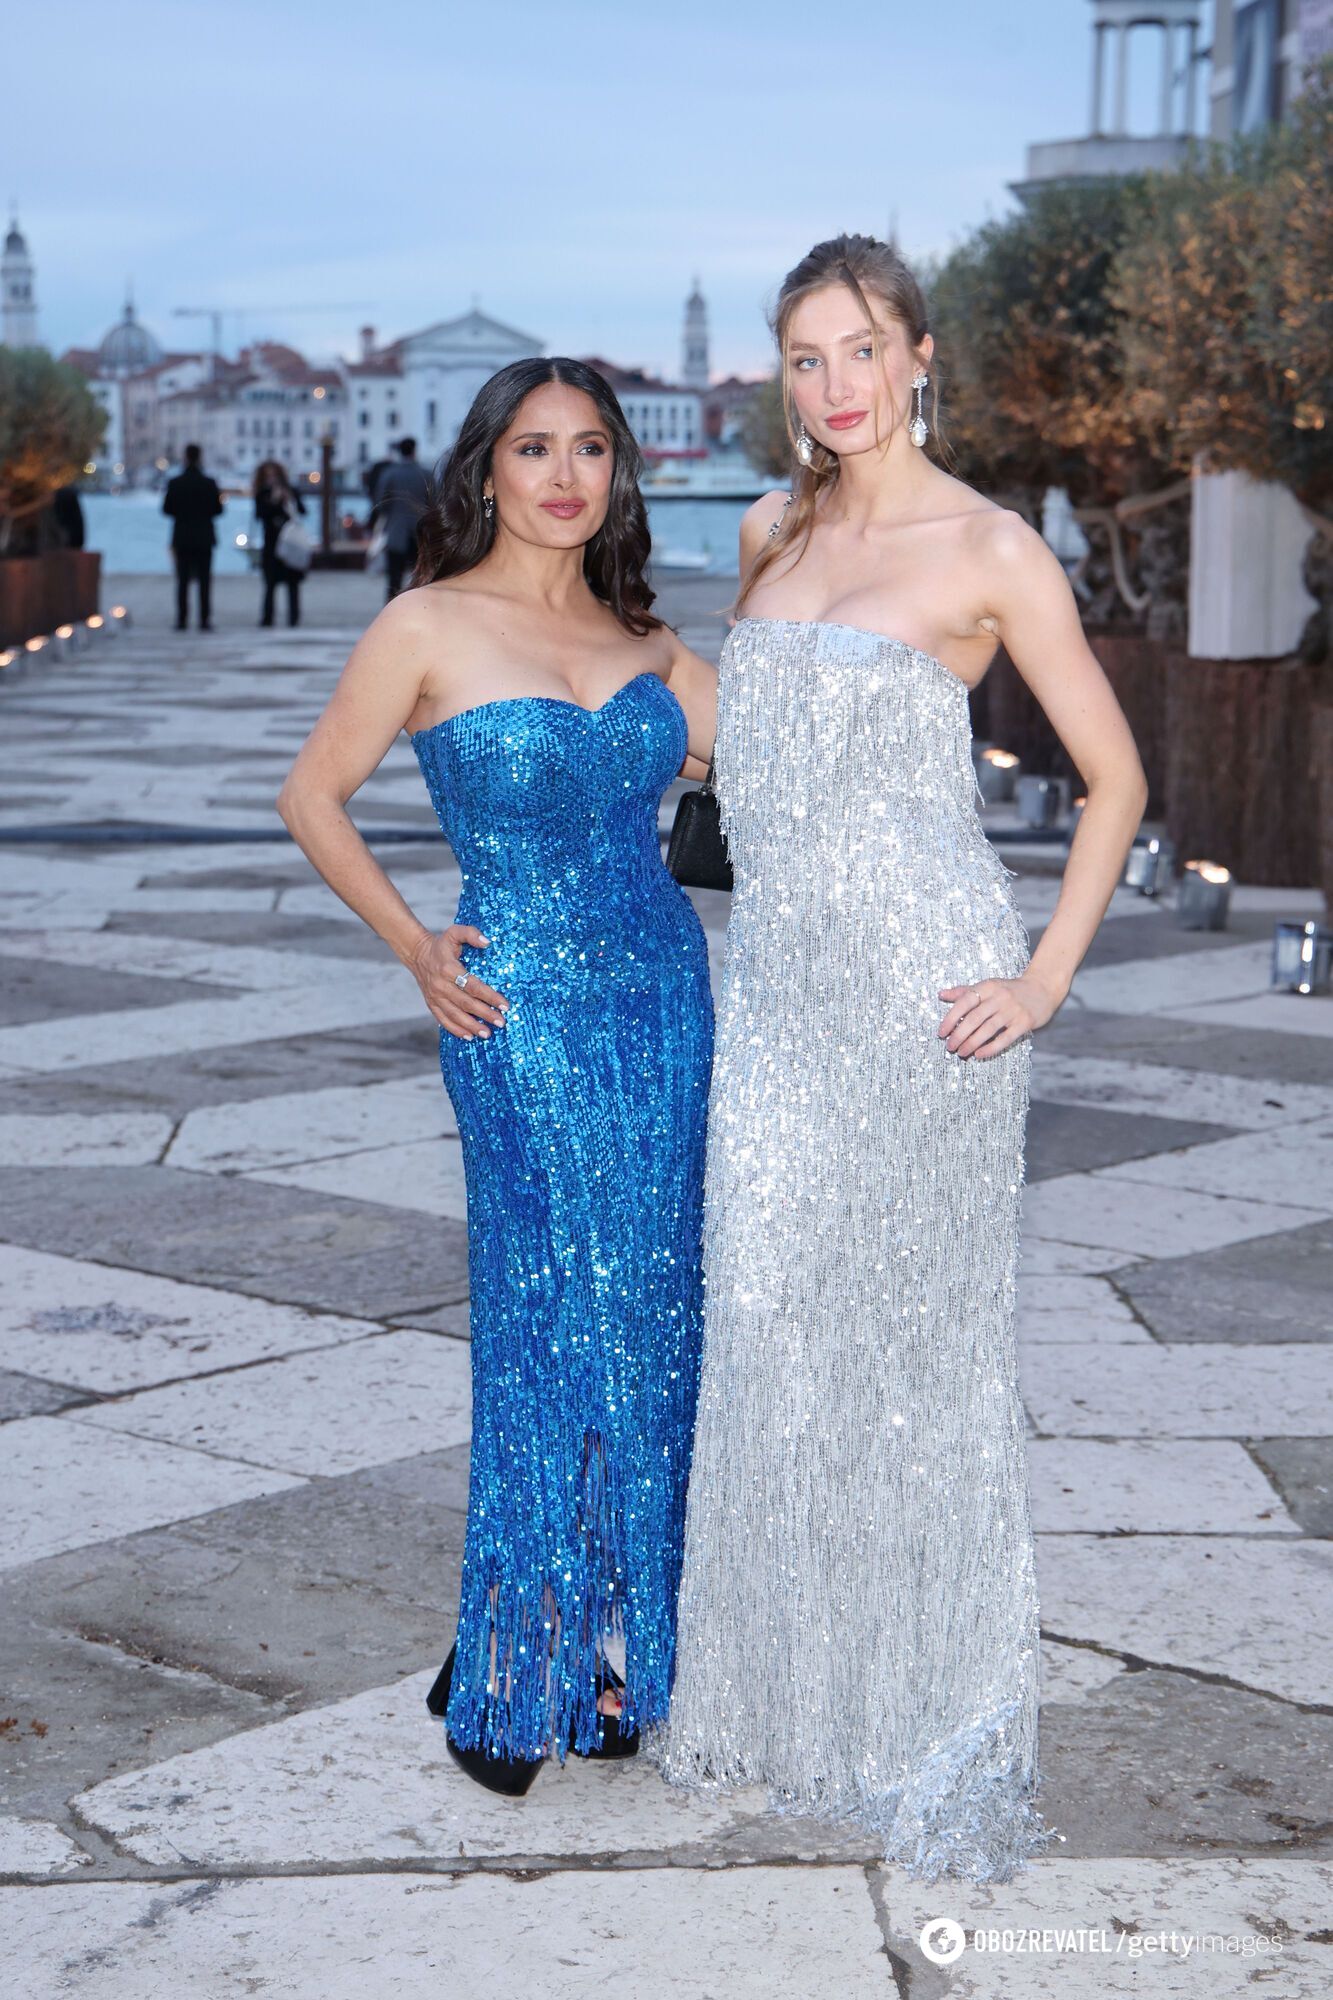 Like two sisters. 57-year-old Salma Hayek and her 23-year-old stepdaughter went out in dazzling sequined dresses